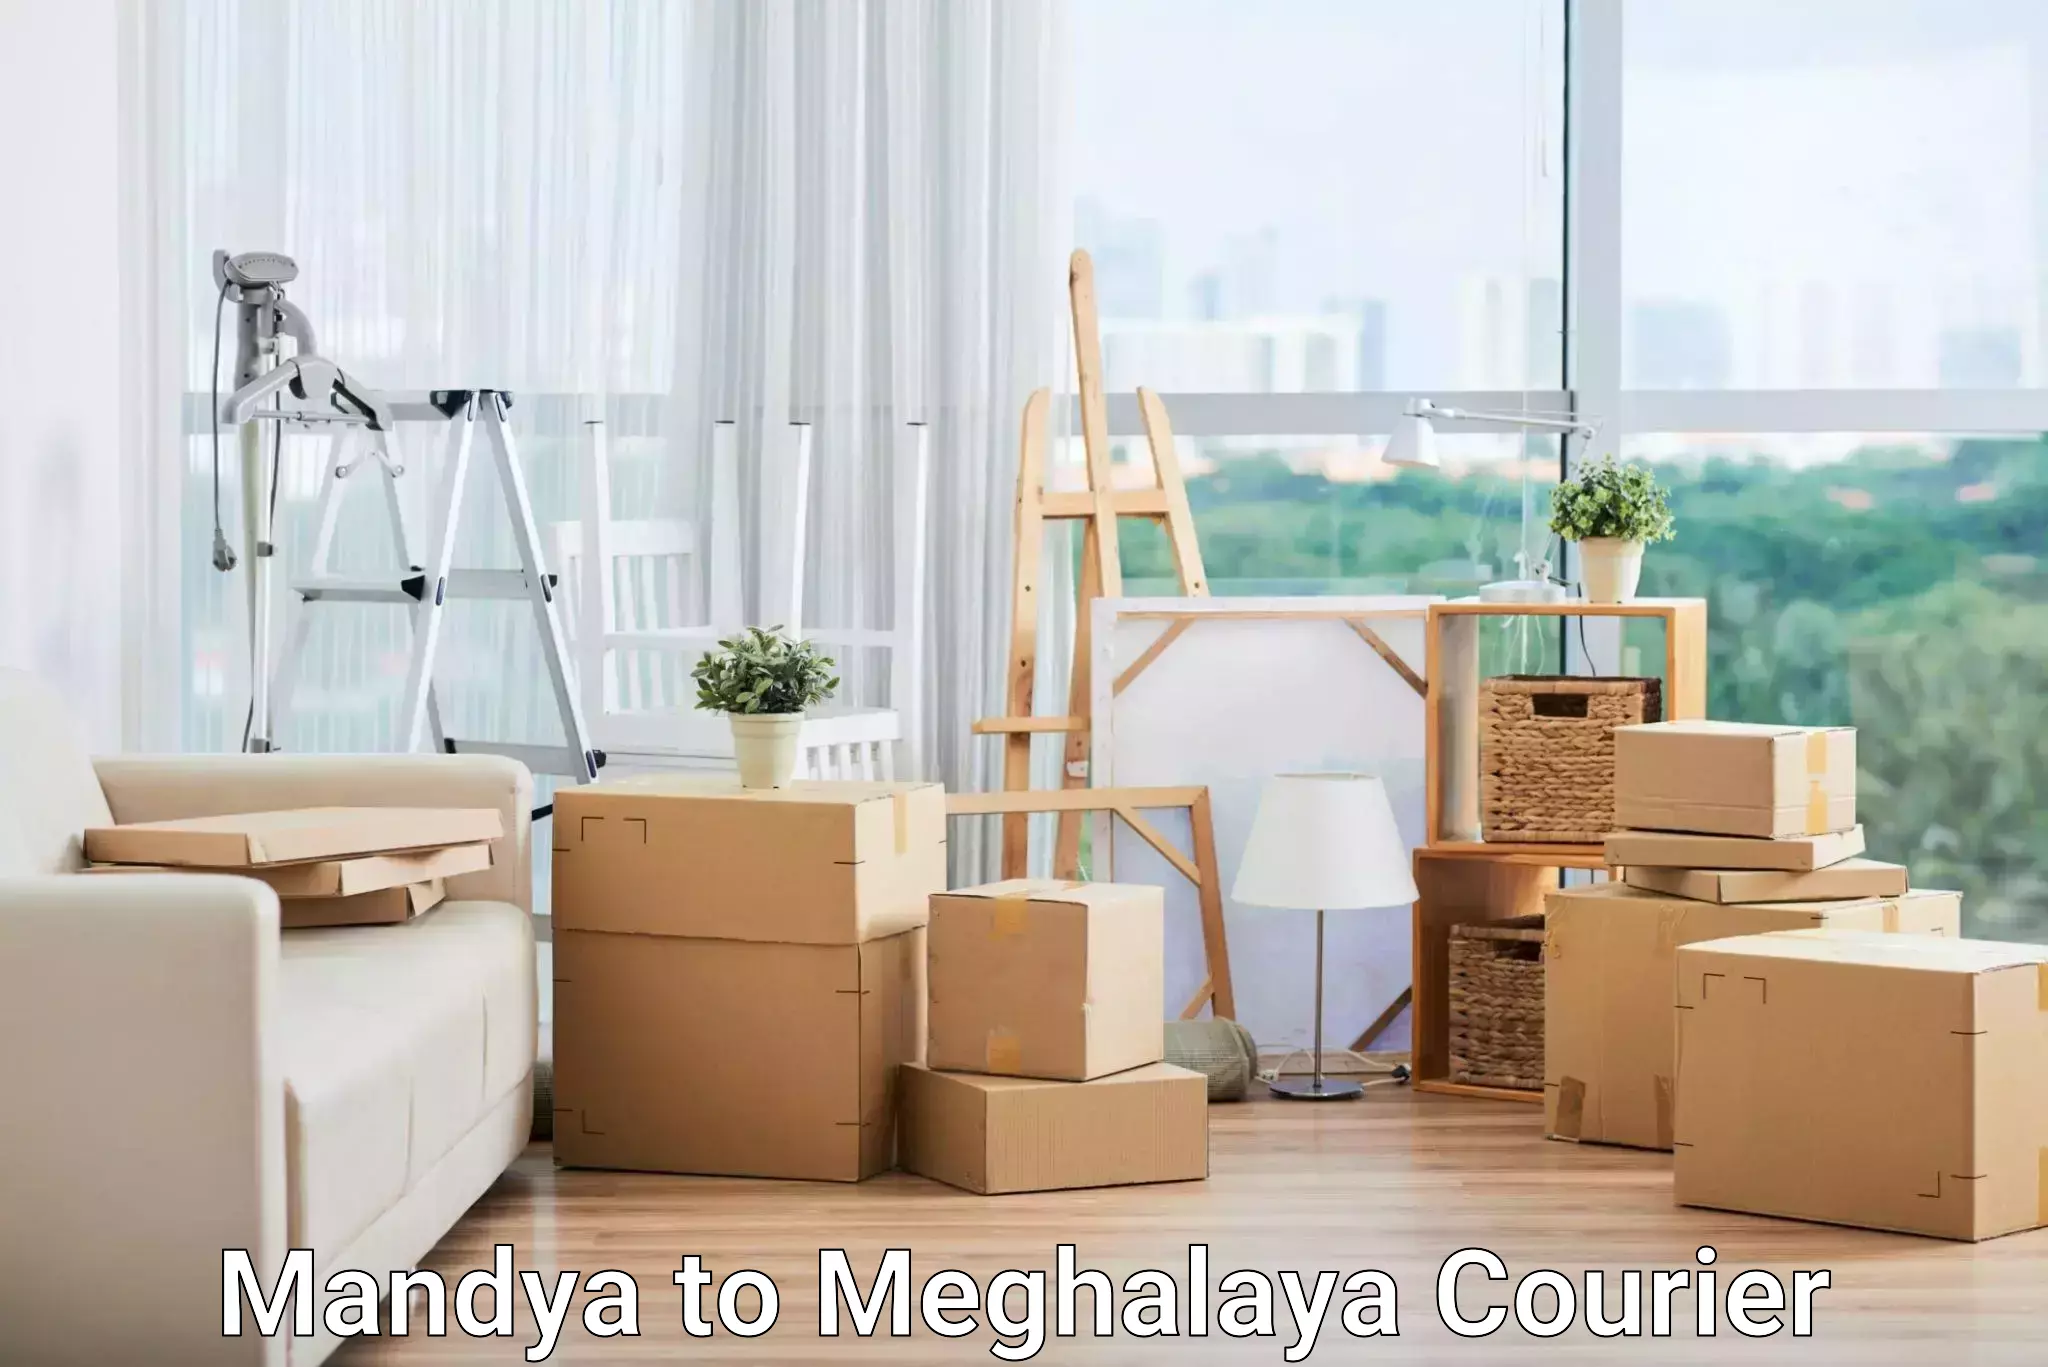 Comprehensive shipping services in Mandya to Shillong